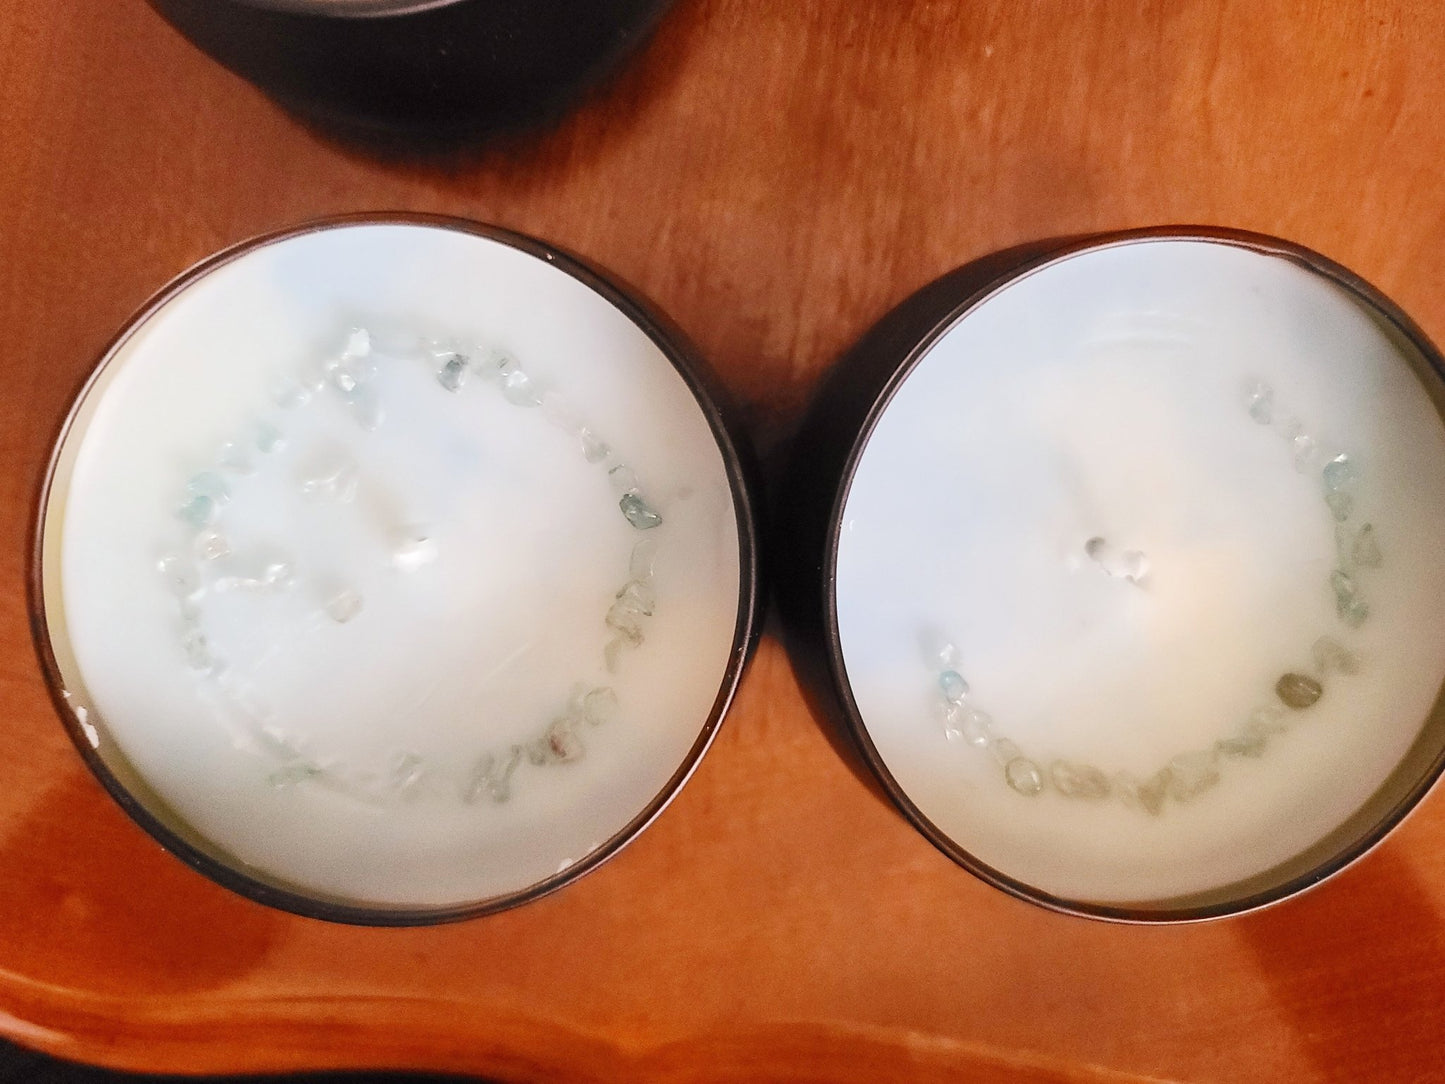 Mindful Candles - Peace 7oz - Licentious TreatsMindful Candles - Peace 7oz